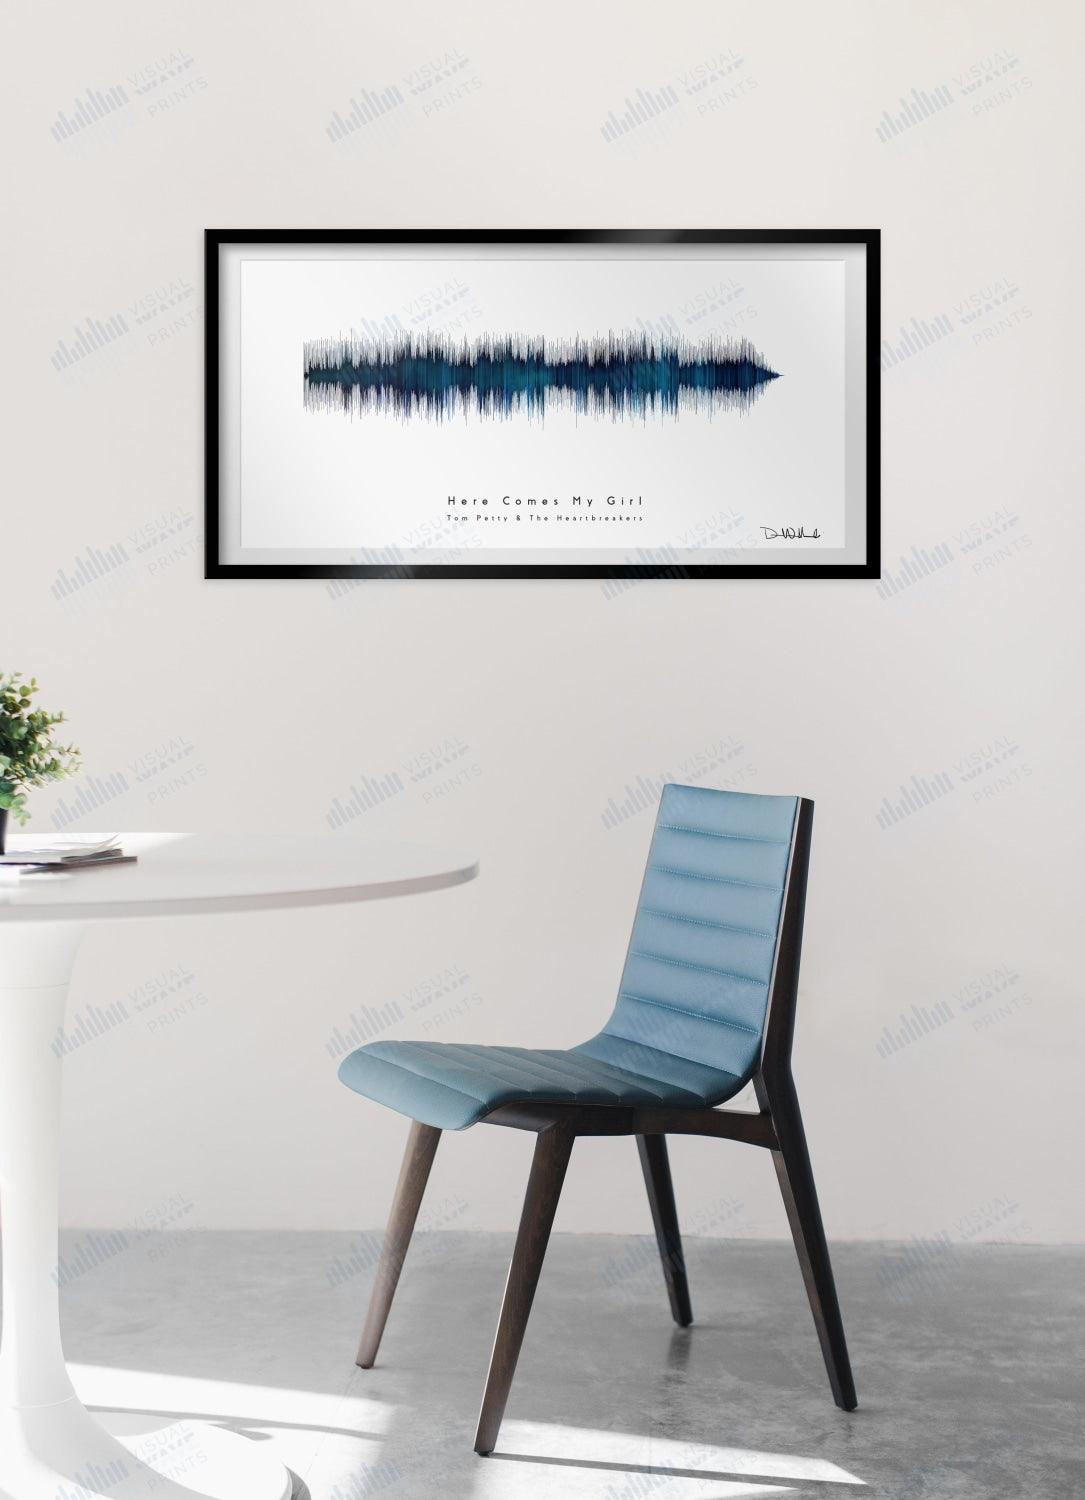 Here Comes My Girl by Tom Petty and the Heartbreakers - Visual Wave Prints